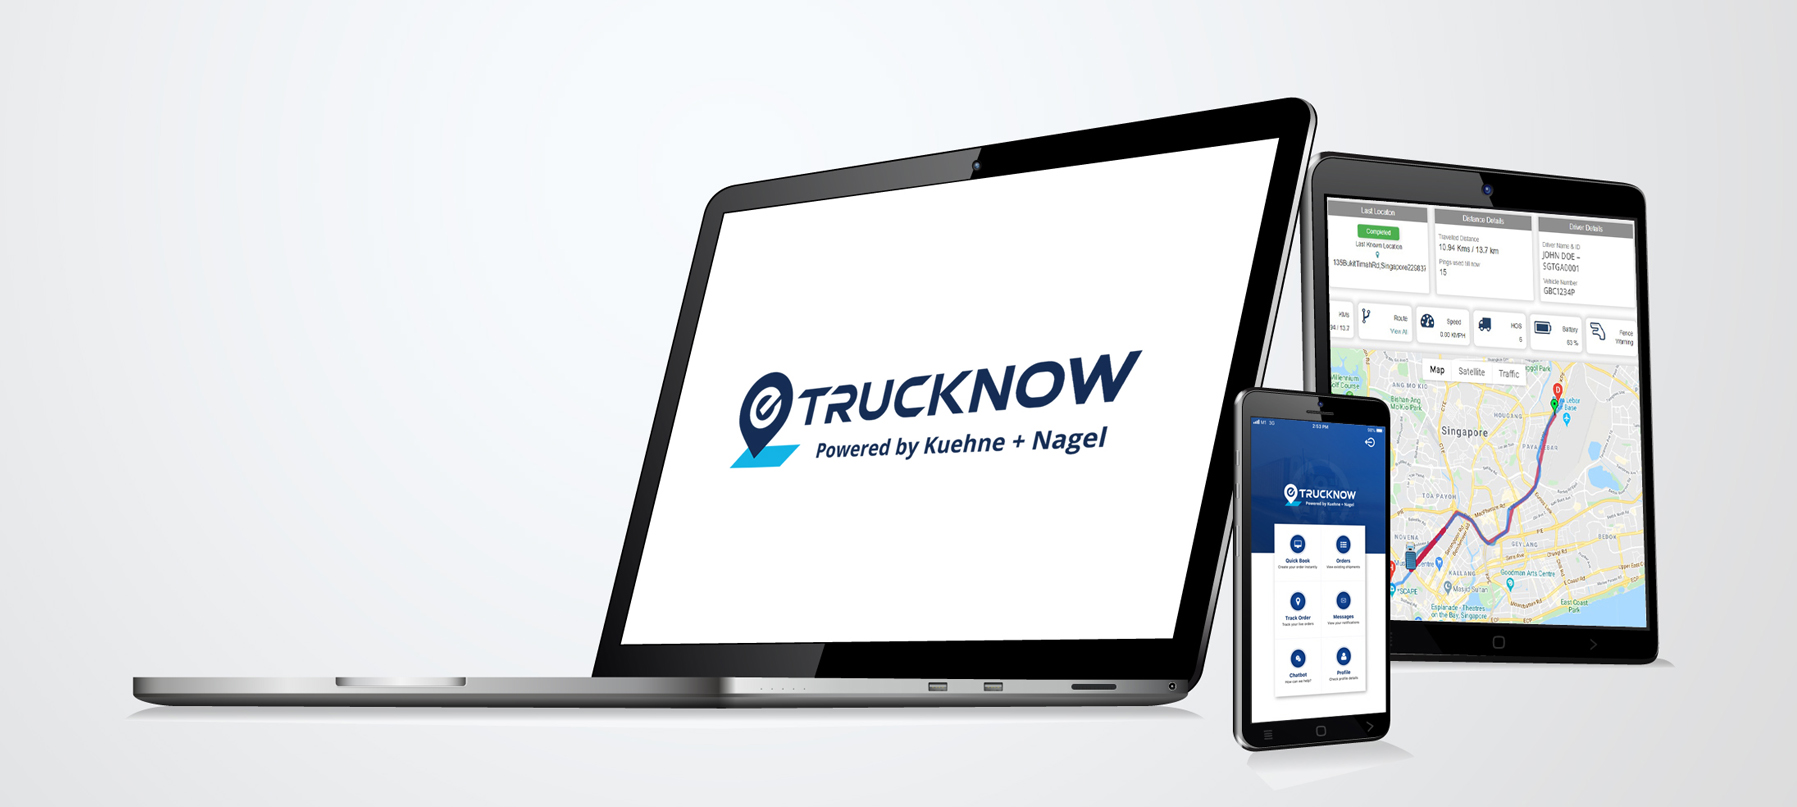 eTrucknow - a digital trucking ecosystem to simplify your day-to-day operations